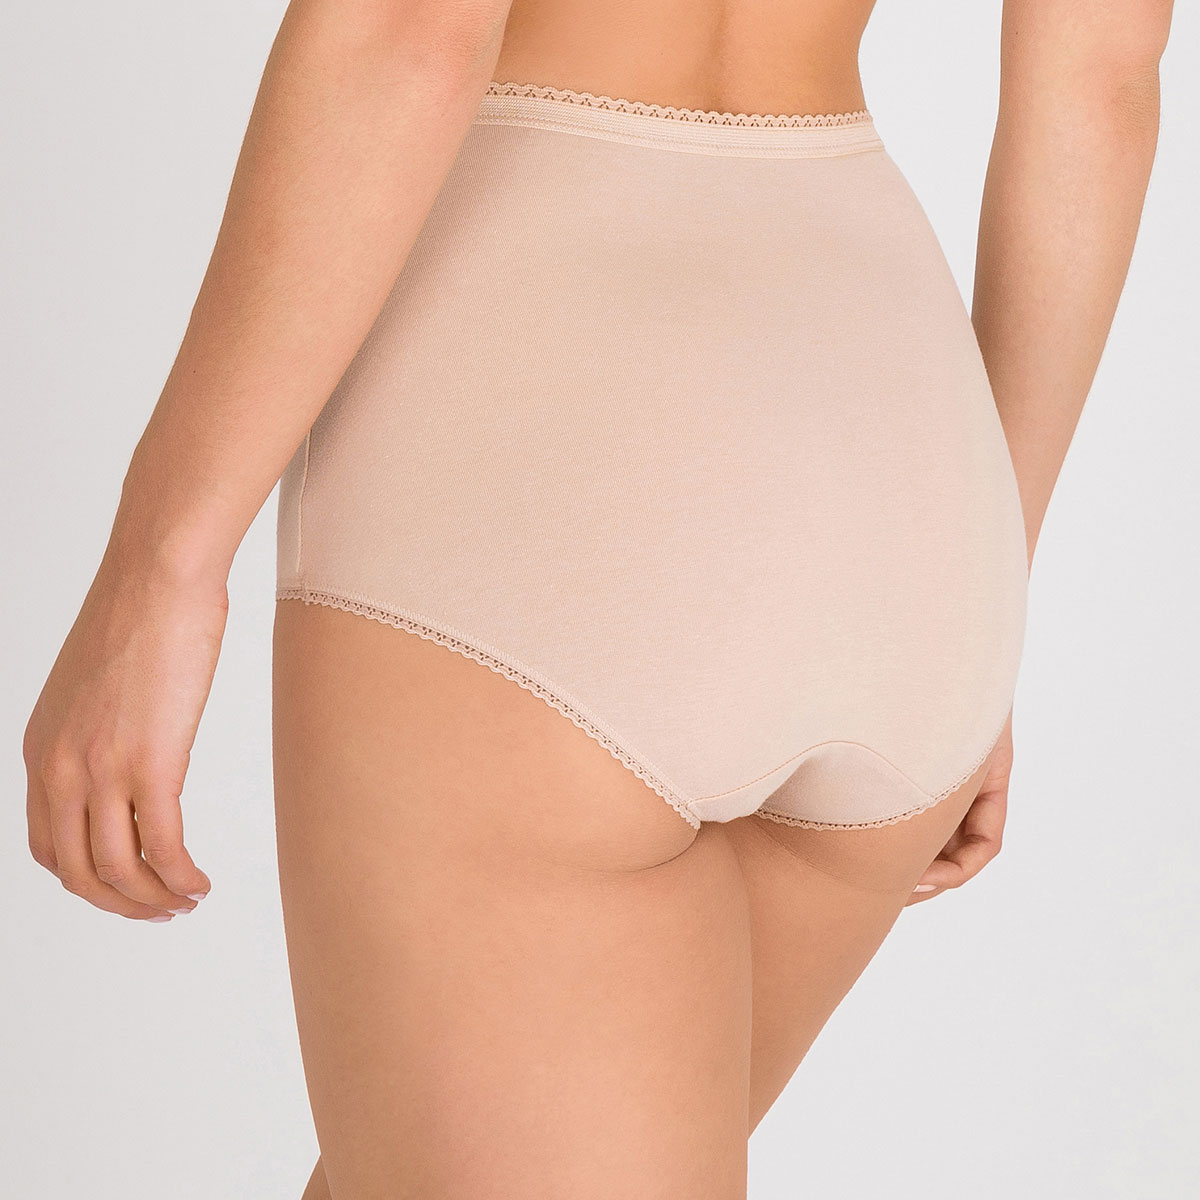 2 Culottes taille haute beige – Coton Stretch, , PLAYTEX